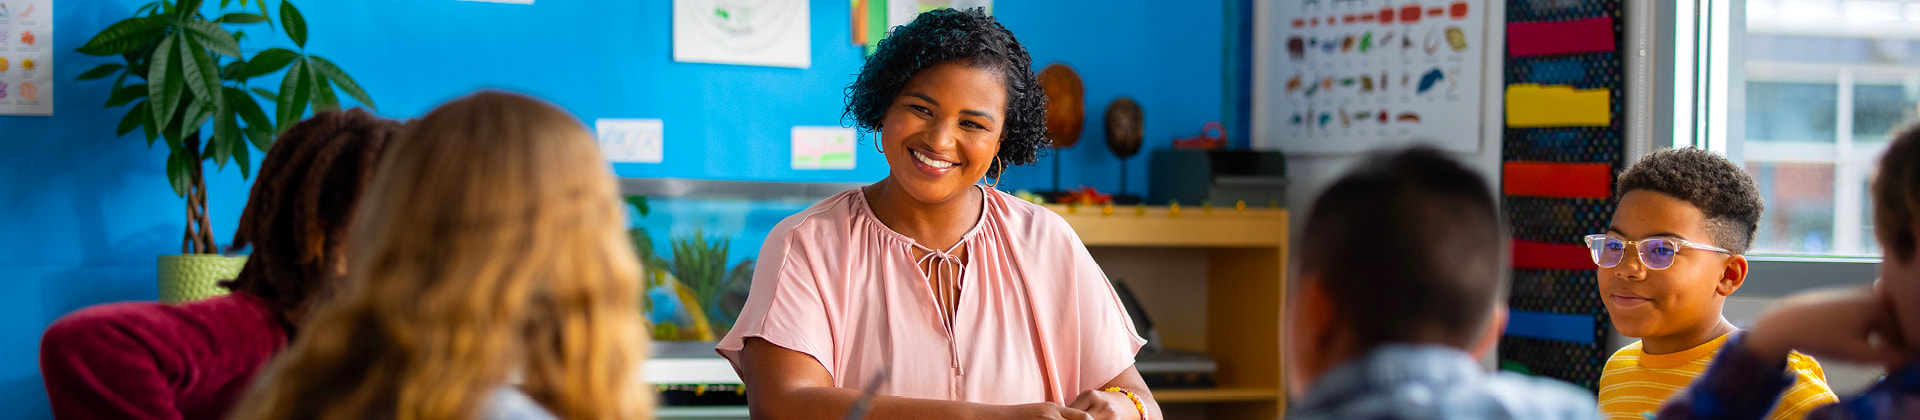 Toya S., a woman with short curly hair and a pink blouse, teaches a group of students in a classroom